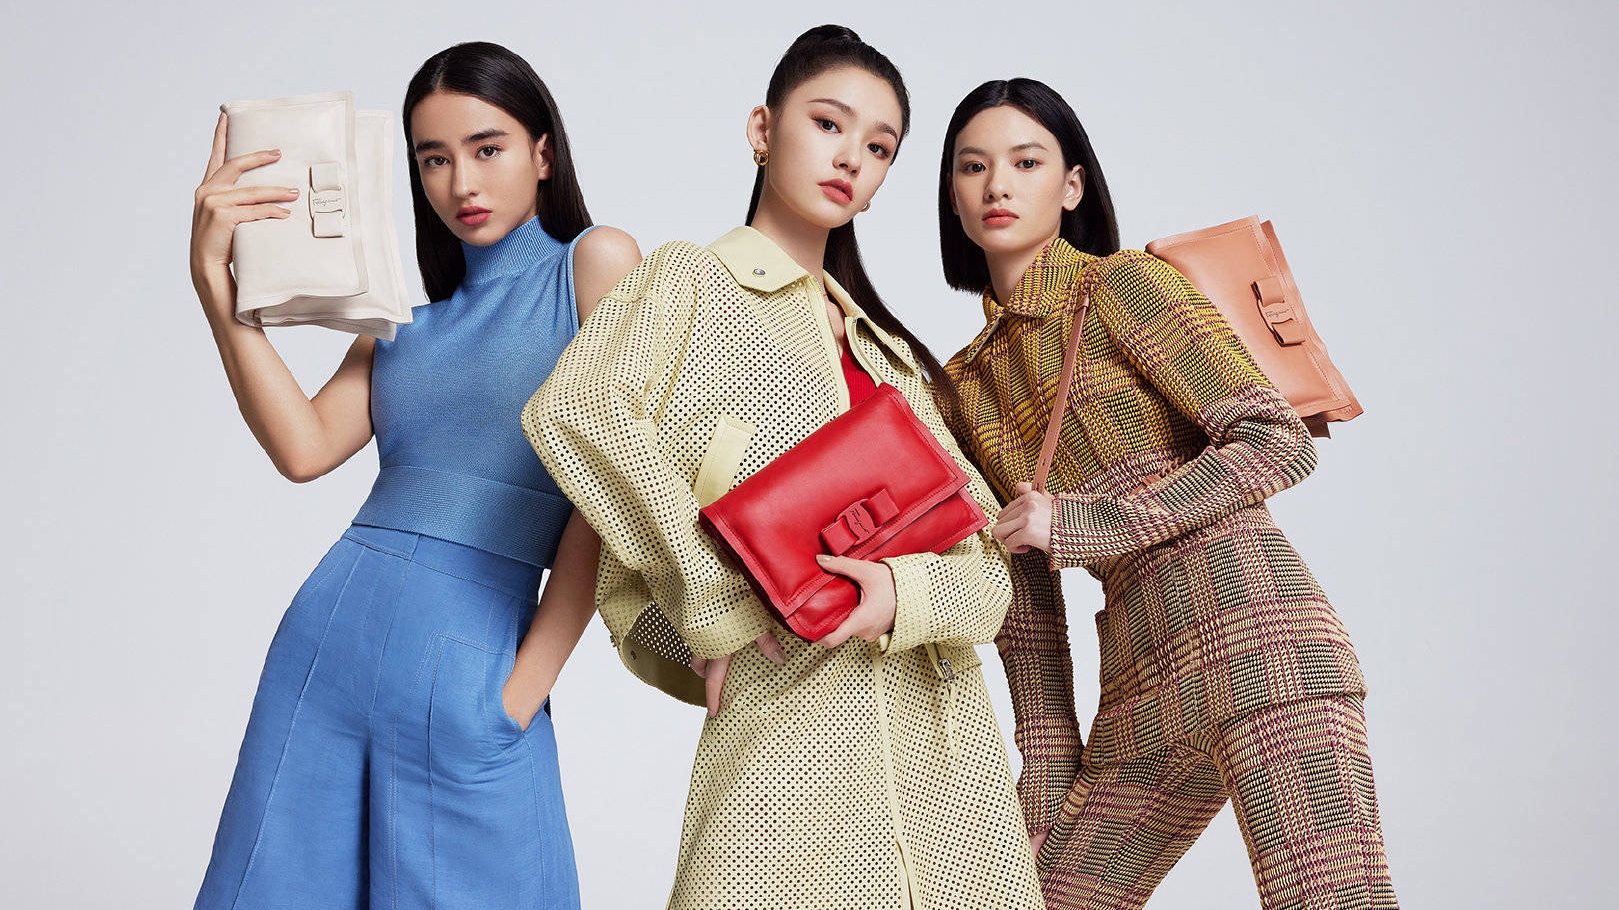 Burberry CEO Marco Gobbetti will head up Salvatore Ferragamo starting next year. But will this change be enough to revive the struggling shoemaker? Photo: Ferragamo's Weibo